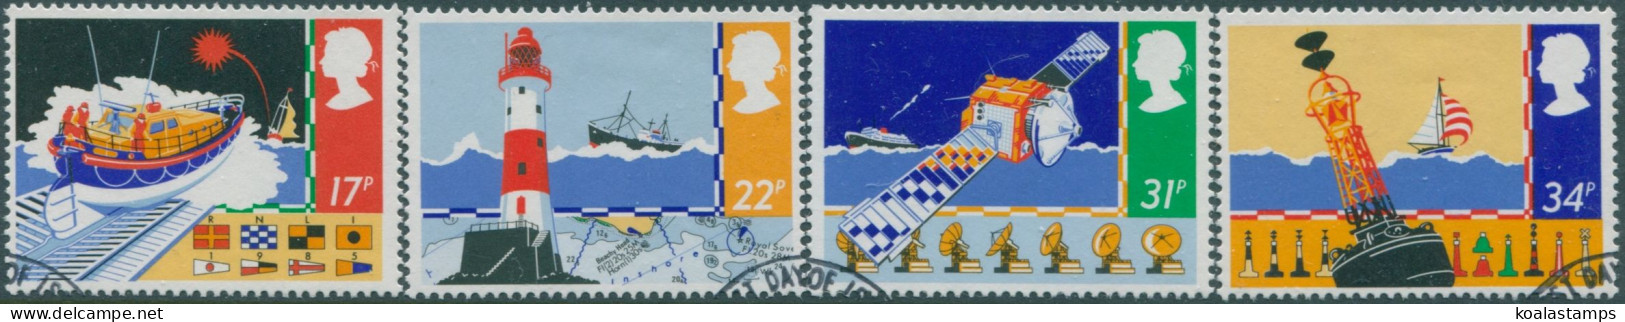 Great Britain 1985 SG1286-1289 QEII Safety At Sea Set FU - Unclassified